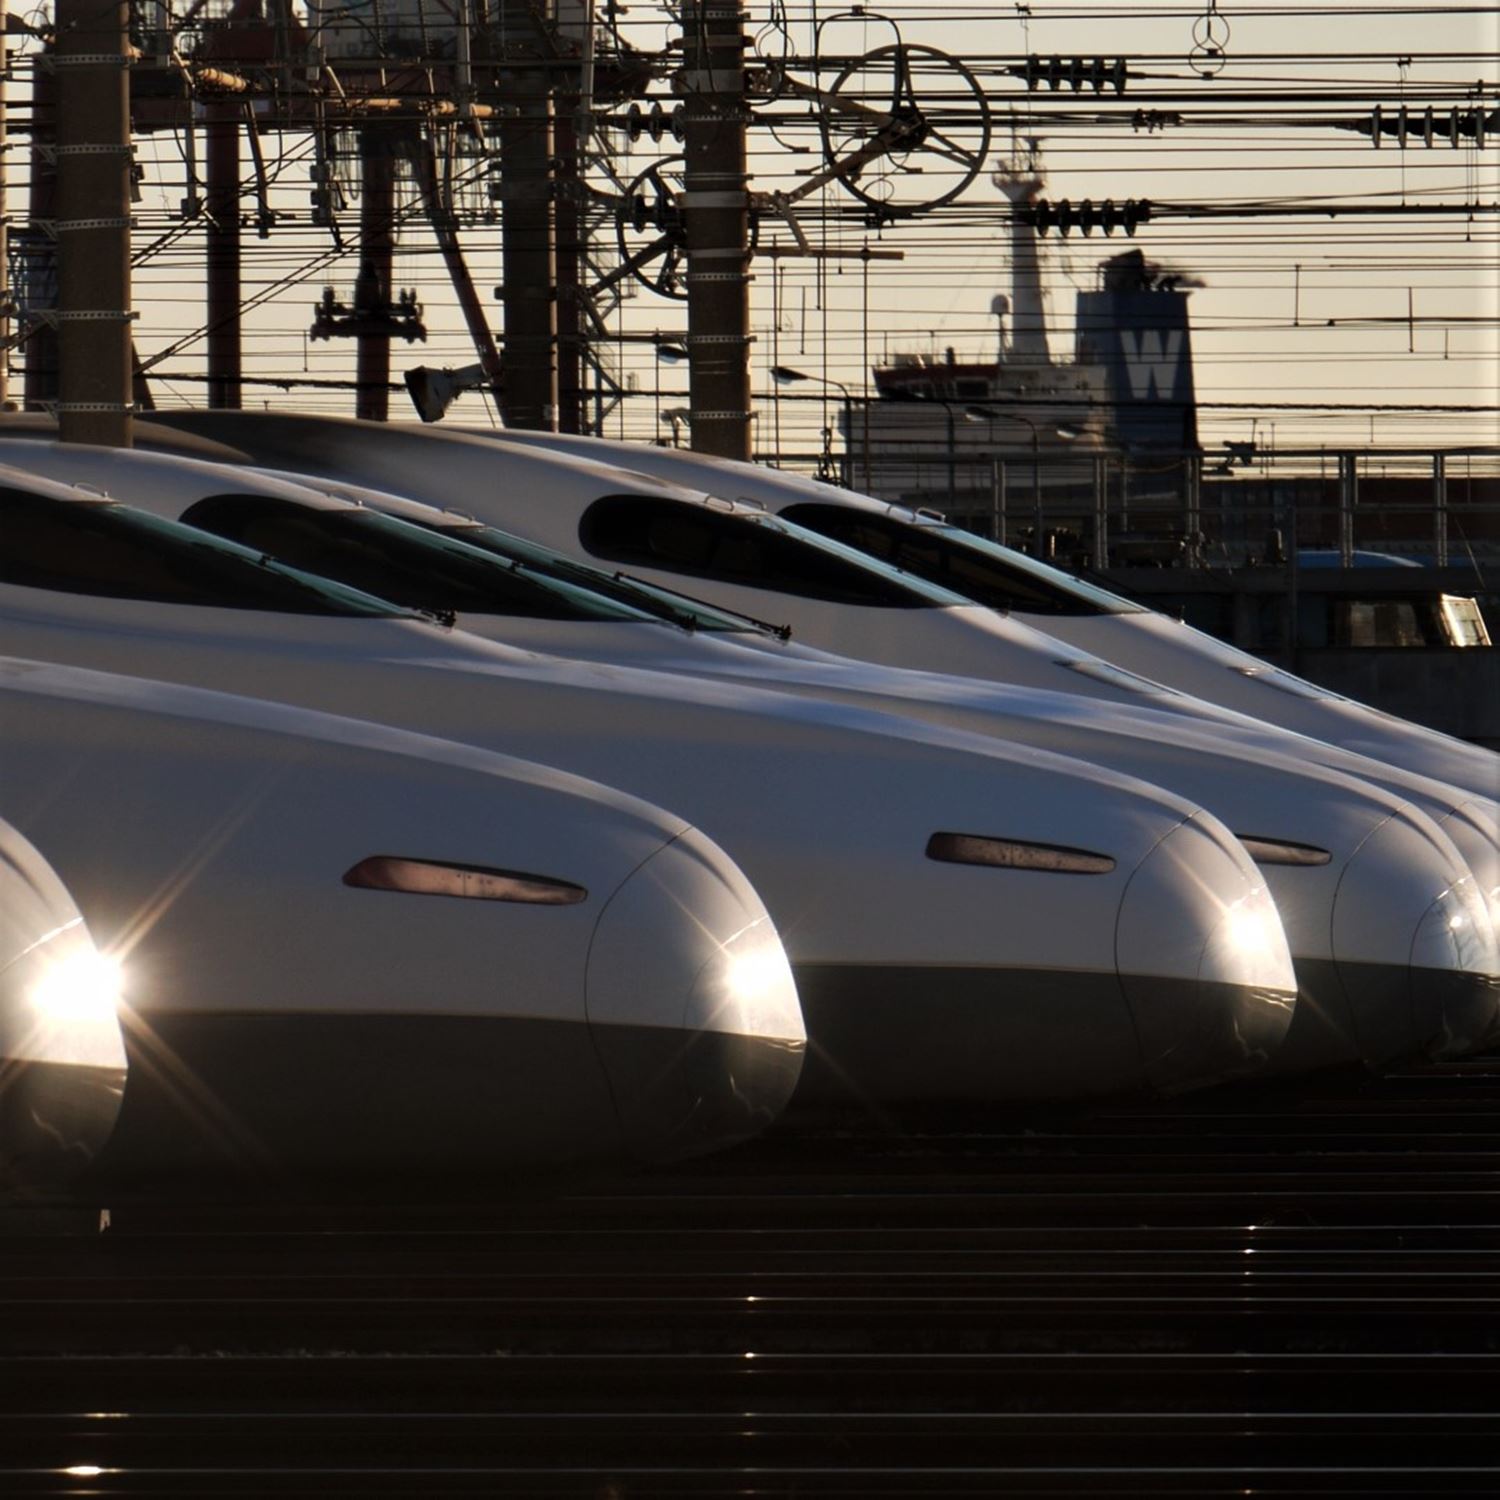 The Shinkansen connects various parts of Japan in accurate time